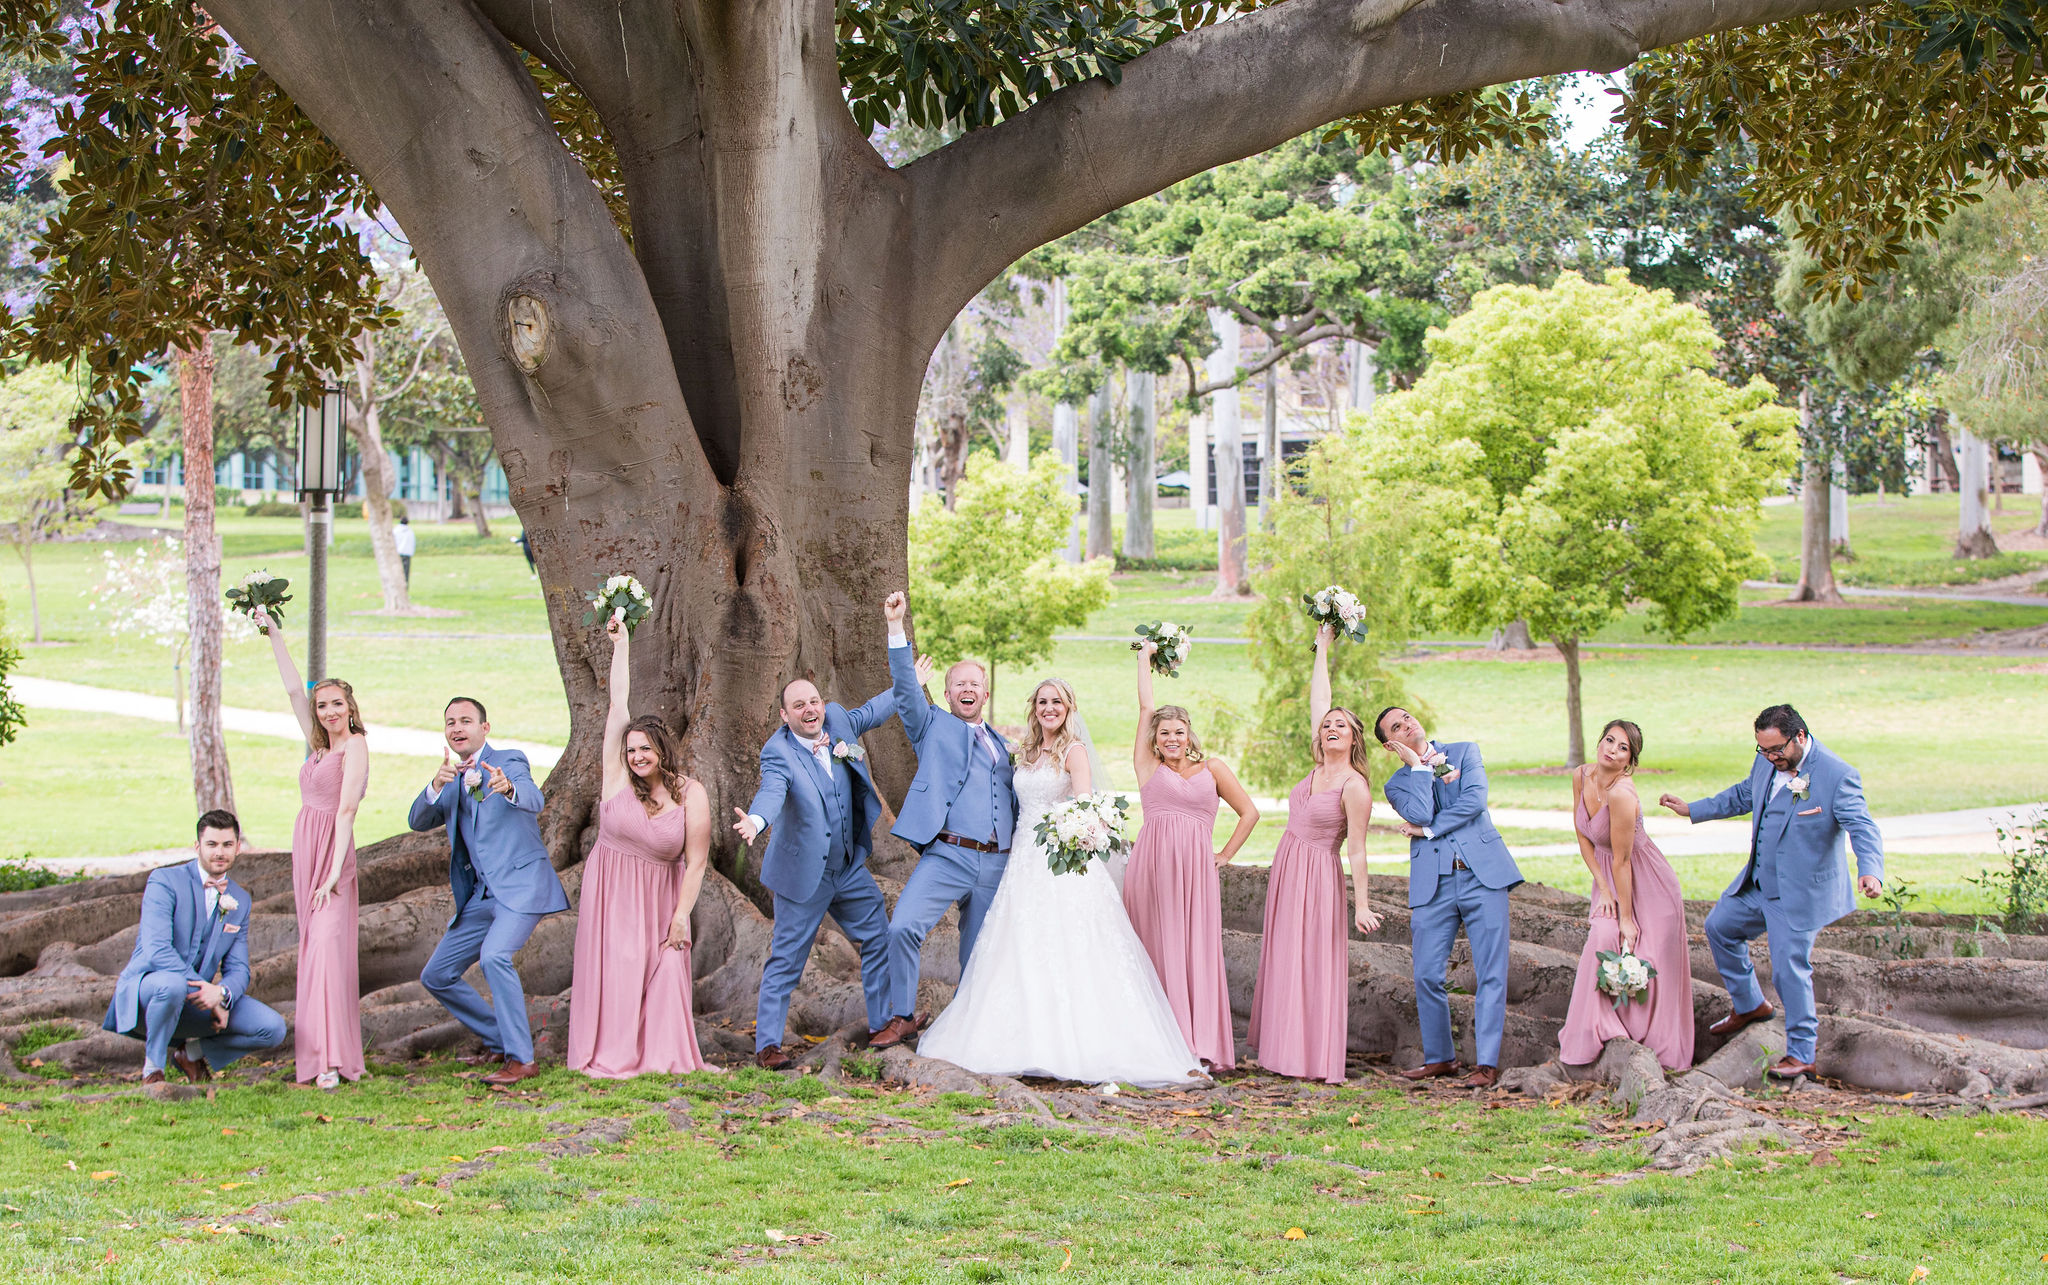 Top 15 Wedding Party Photos That You Must Have For Keep Sake